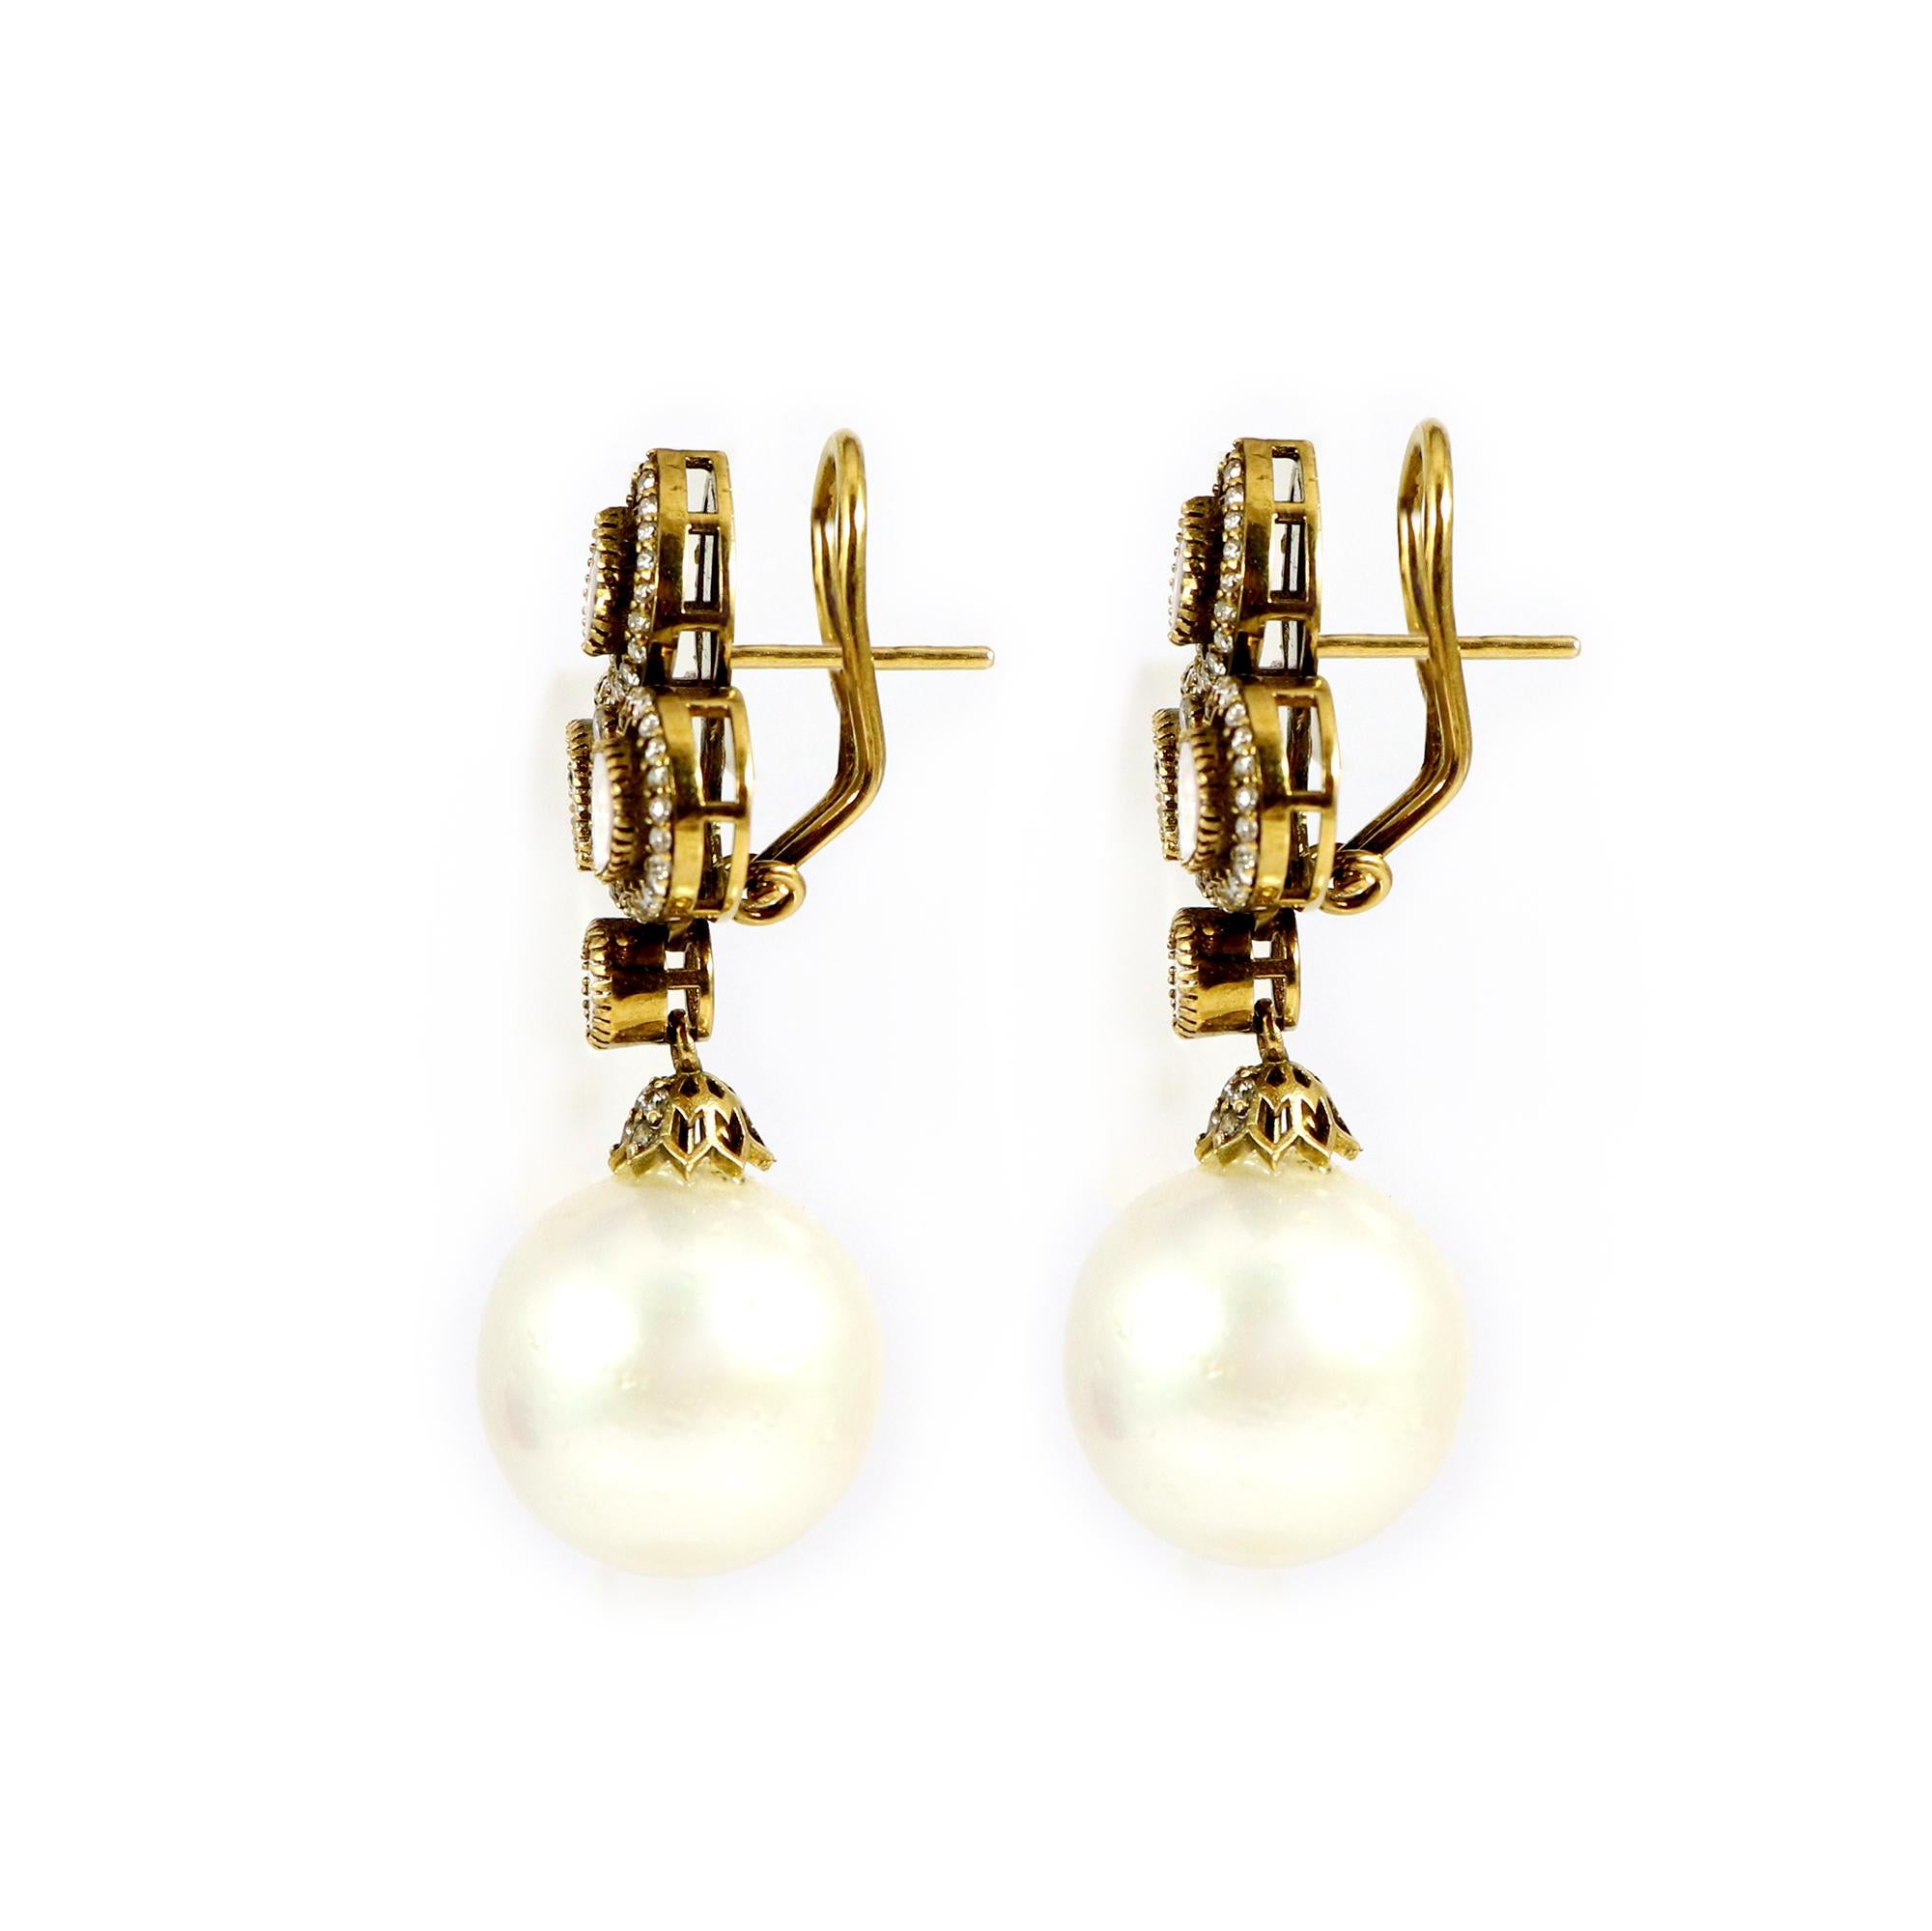 Introducing these stunning Polki diamond earrings, adorned with a captivating array of diamonds and beautiful pearls. These earrings blend traditional and modern design elements to create an exquisite piece of jewelry. Crafted with meticulous